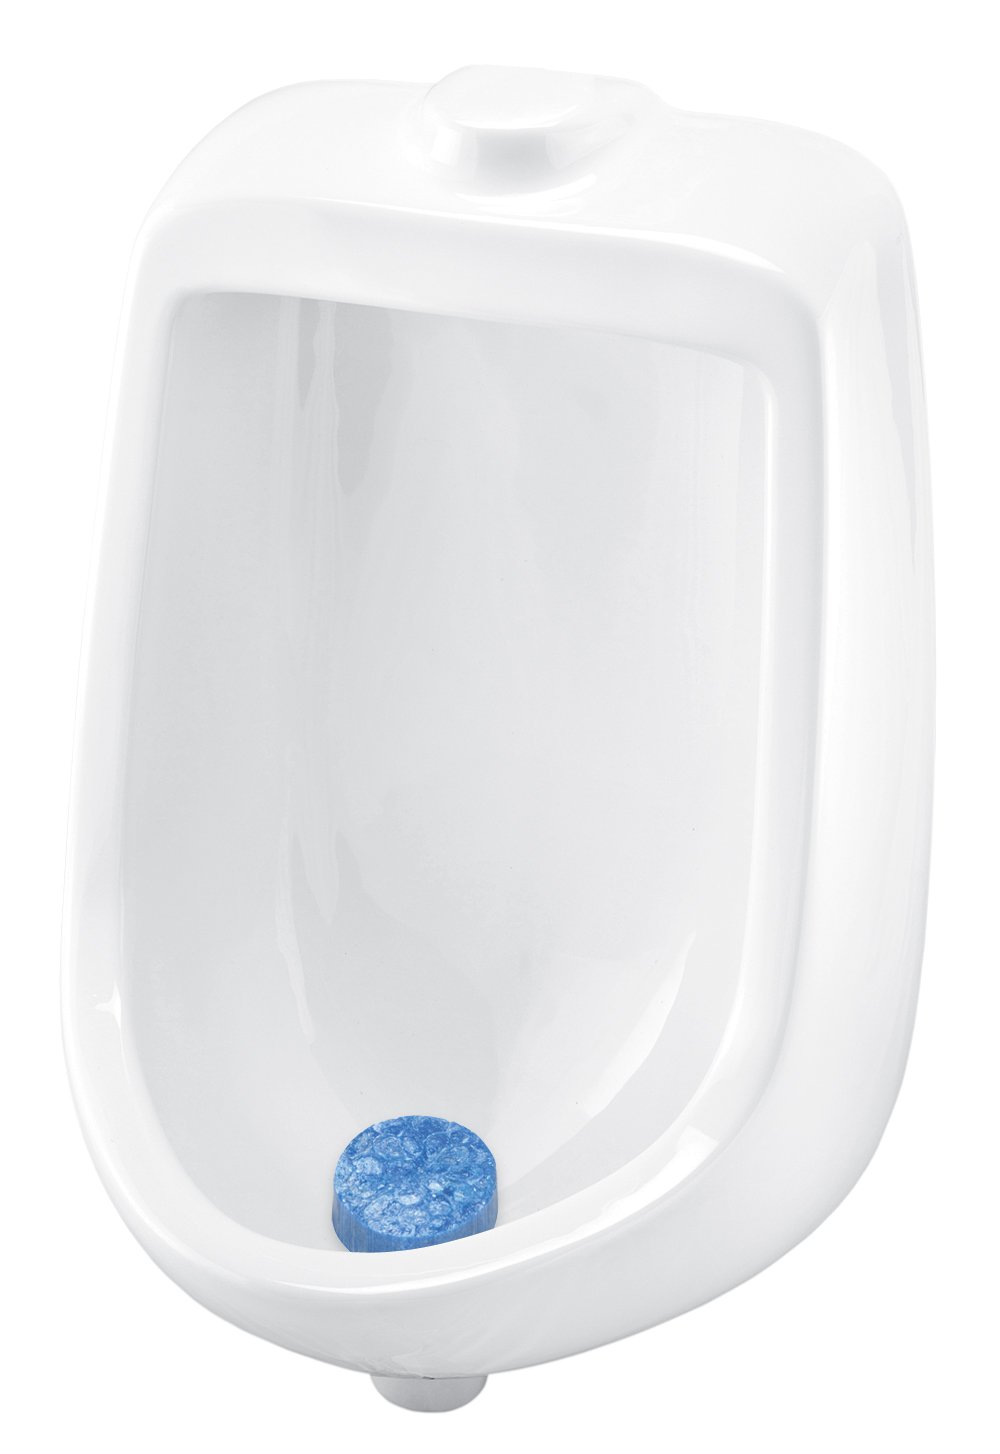 Big D 683 Non-para Urinal Toss Block, Apple Fragrance, 1000 Flushes (Pack of 12) - Ideal for restrooms in Offices, Schools, Restaurants, Hotels, Stores - Urinal Deodorizer Cake Mint Puck